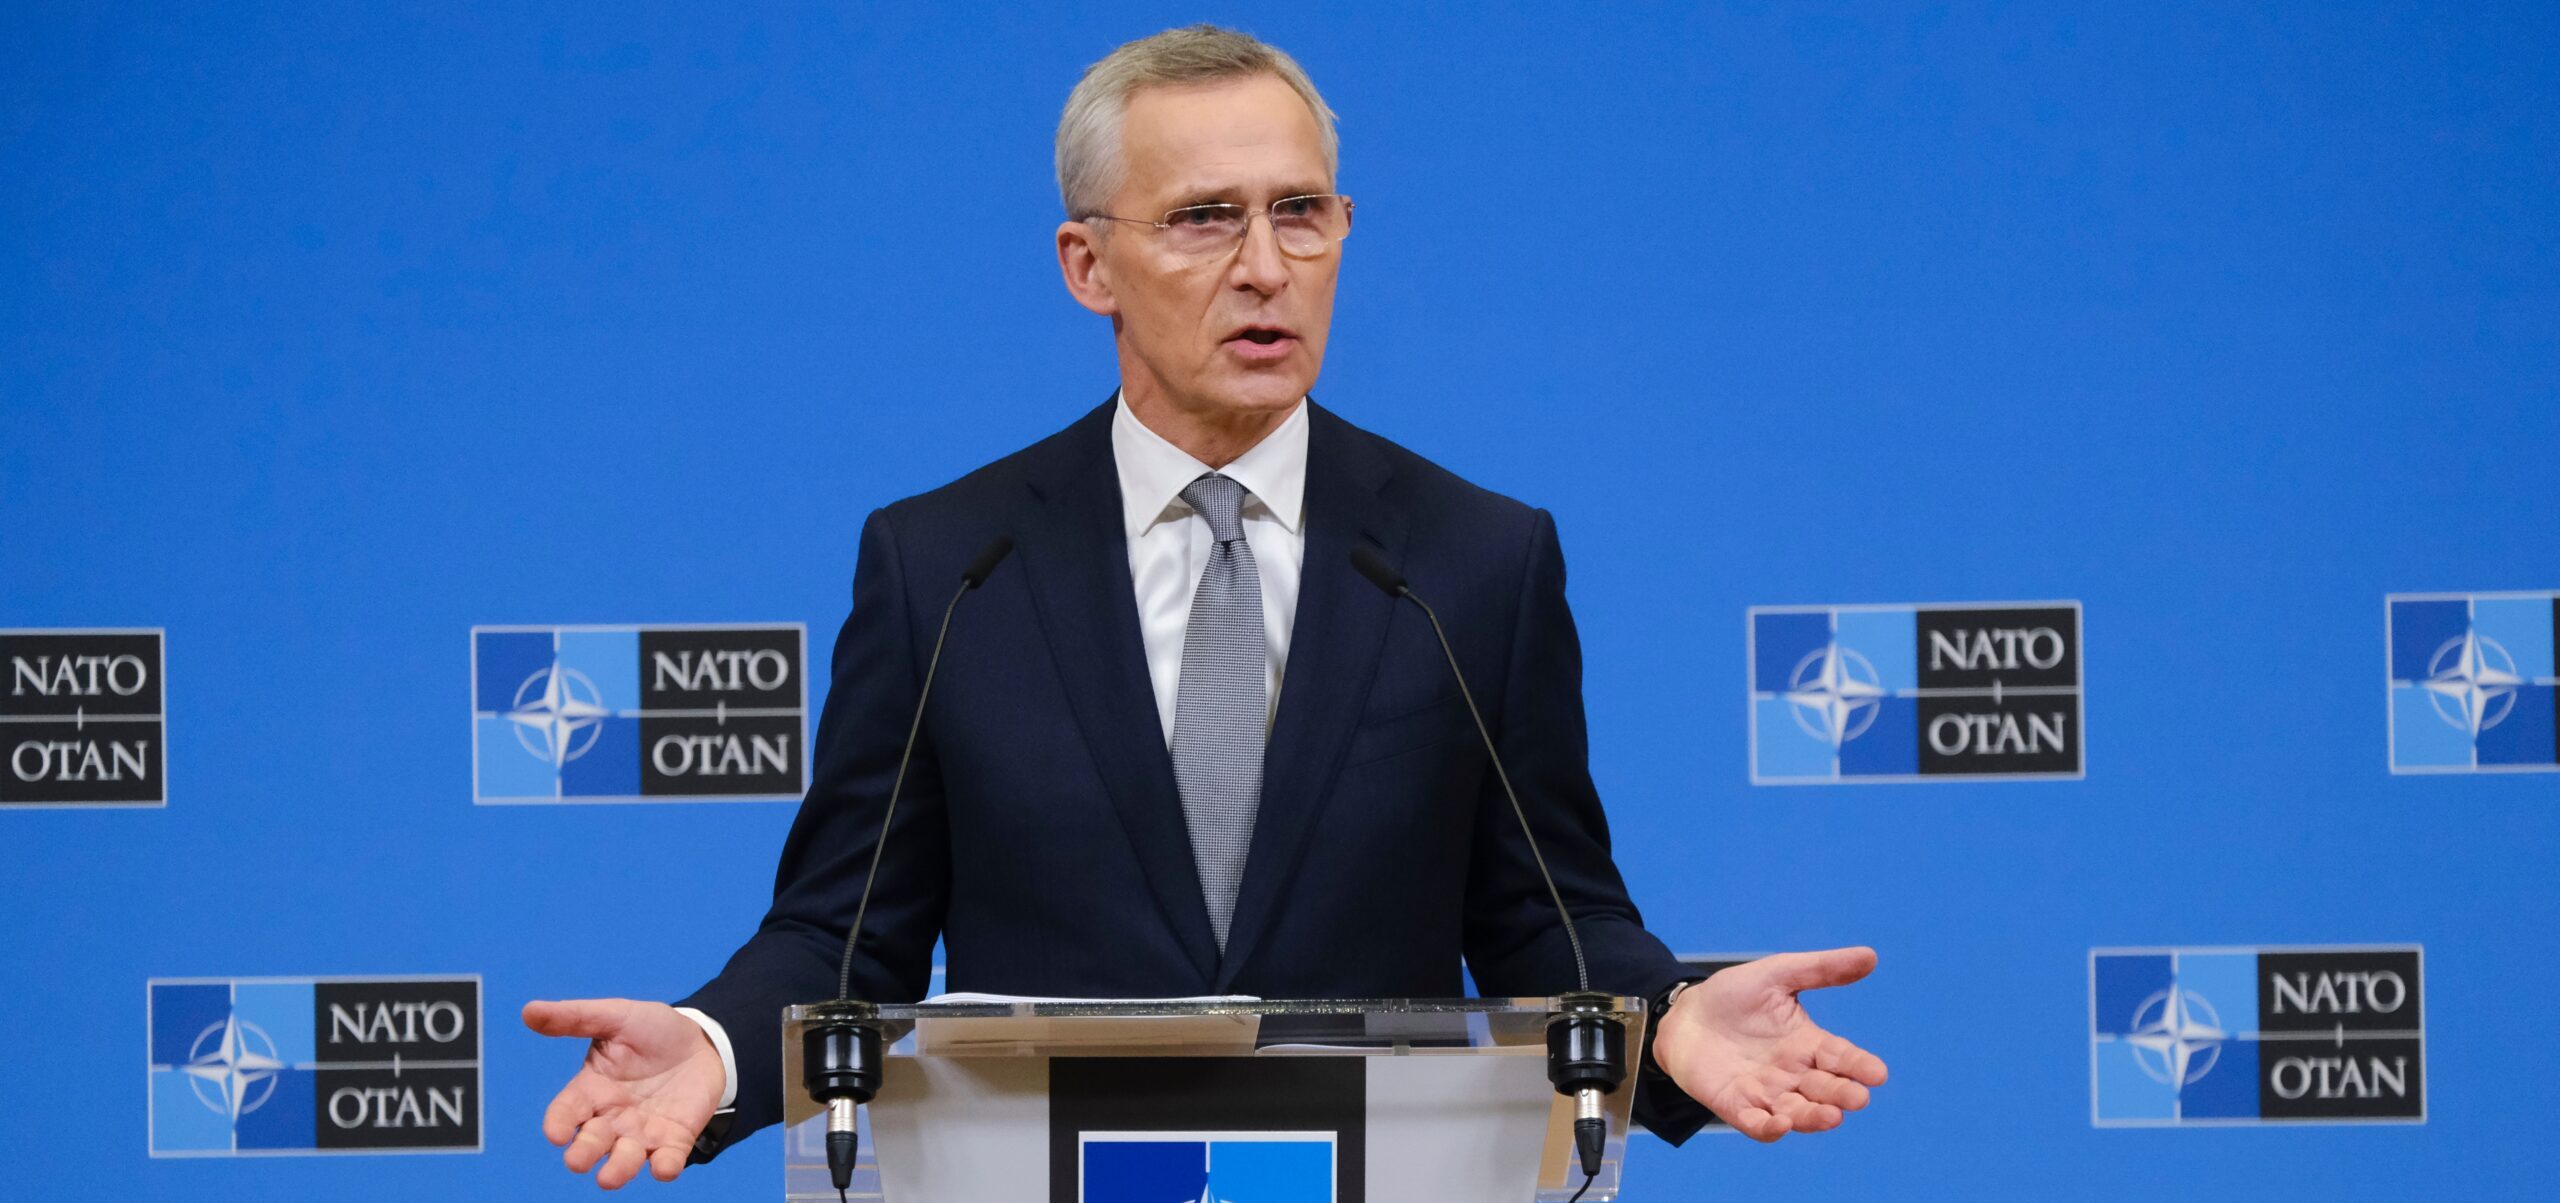 Autocracies join forces: NATO Secretary General on treaty between Russia and North Korea